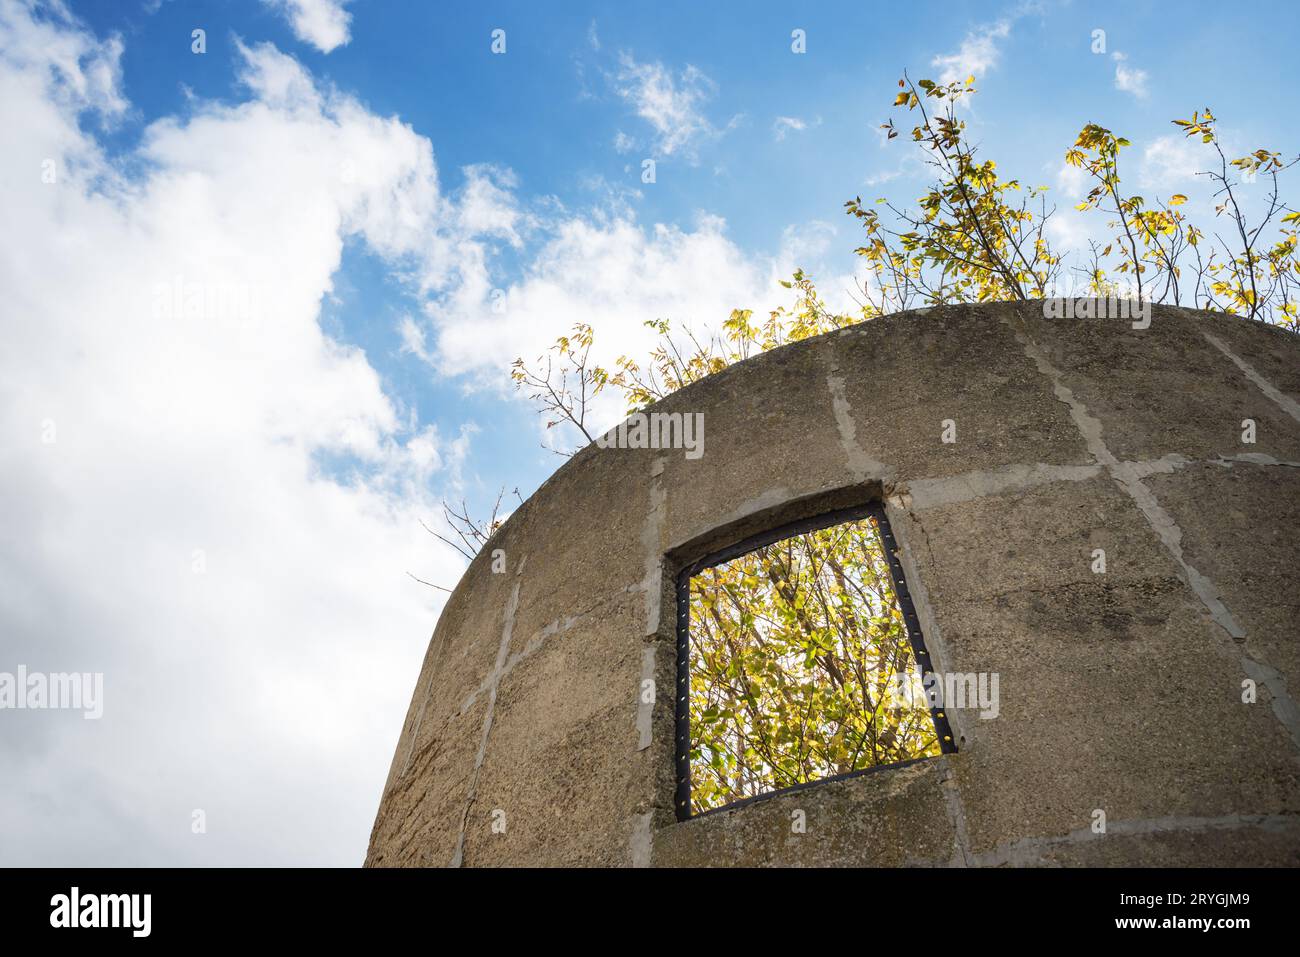 Abandoned Structure On Field Against Sky Stock Photo